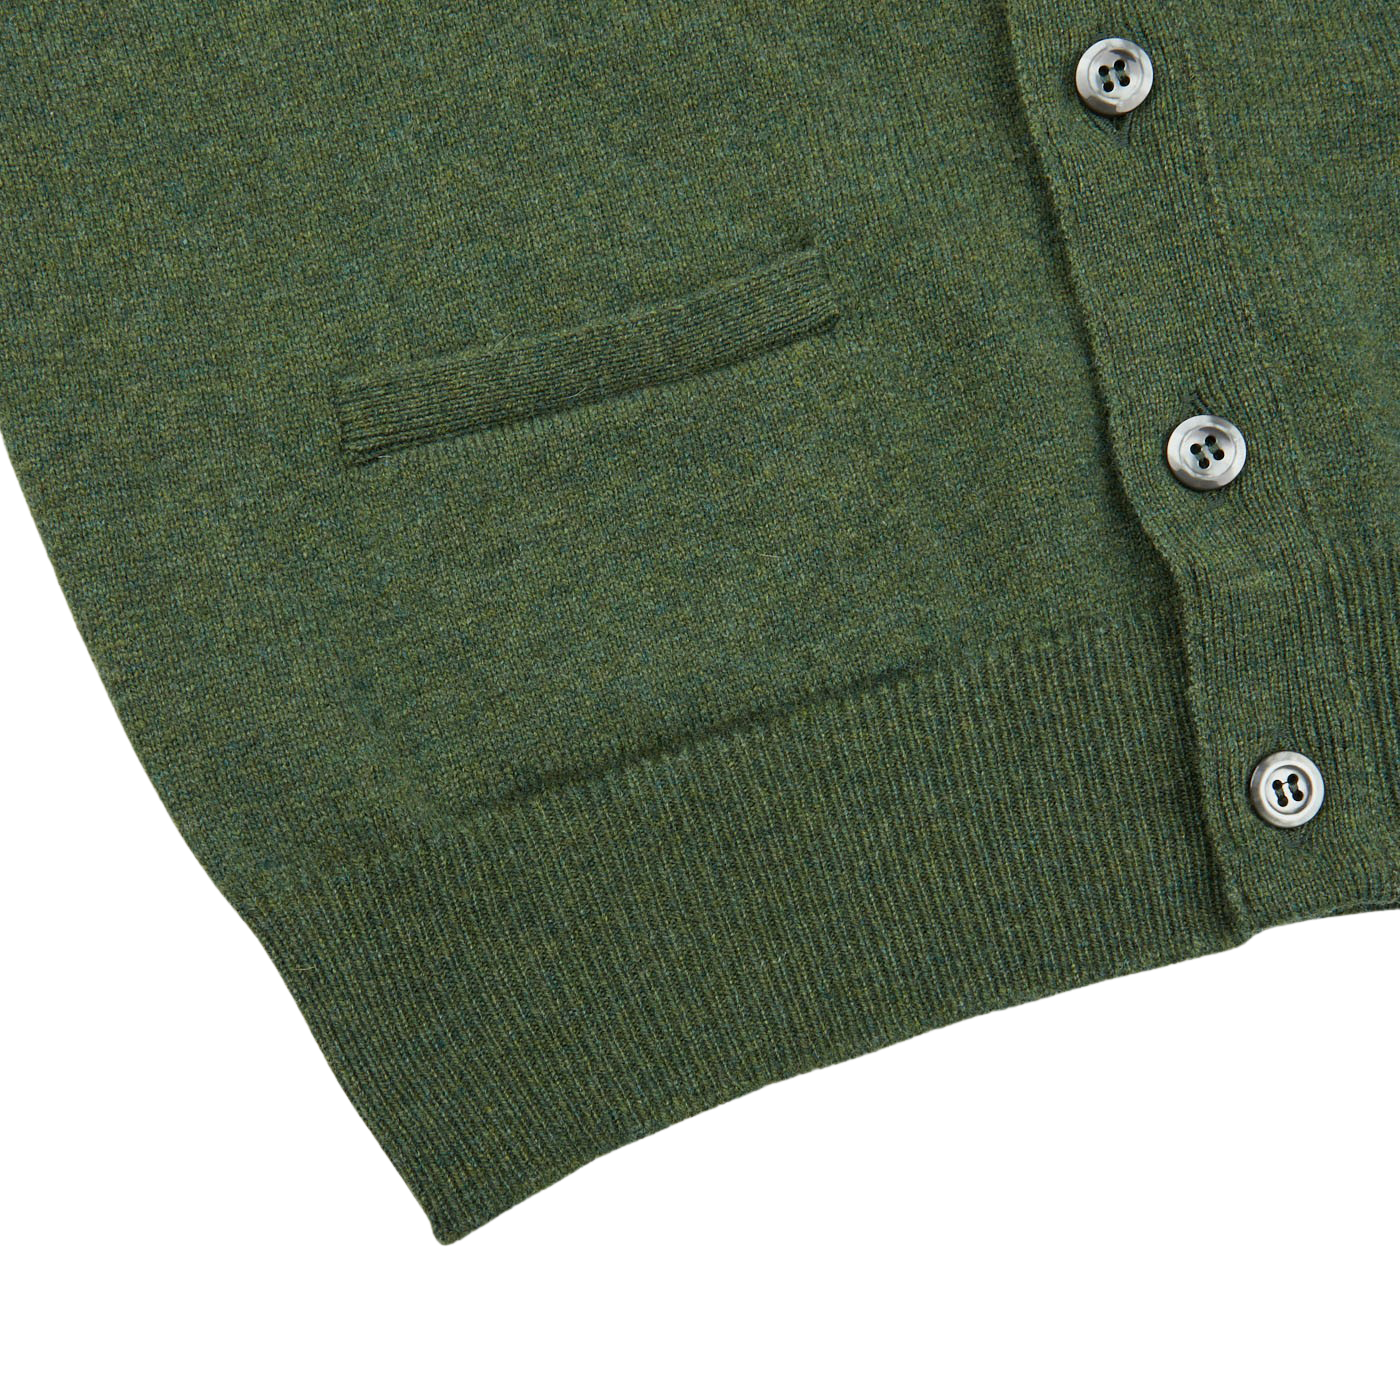 A layering-friendly Rosemary Green Lambswool Saddle Shoulder Cardigan with buttons on the front, made of Scottish lambswool by William Lockie.